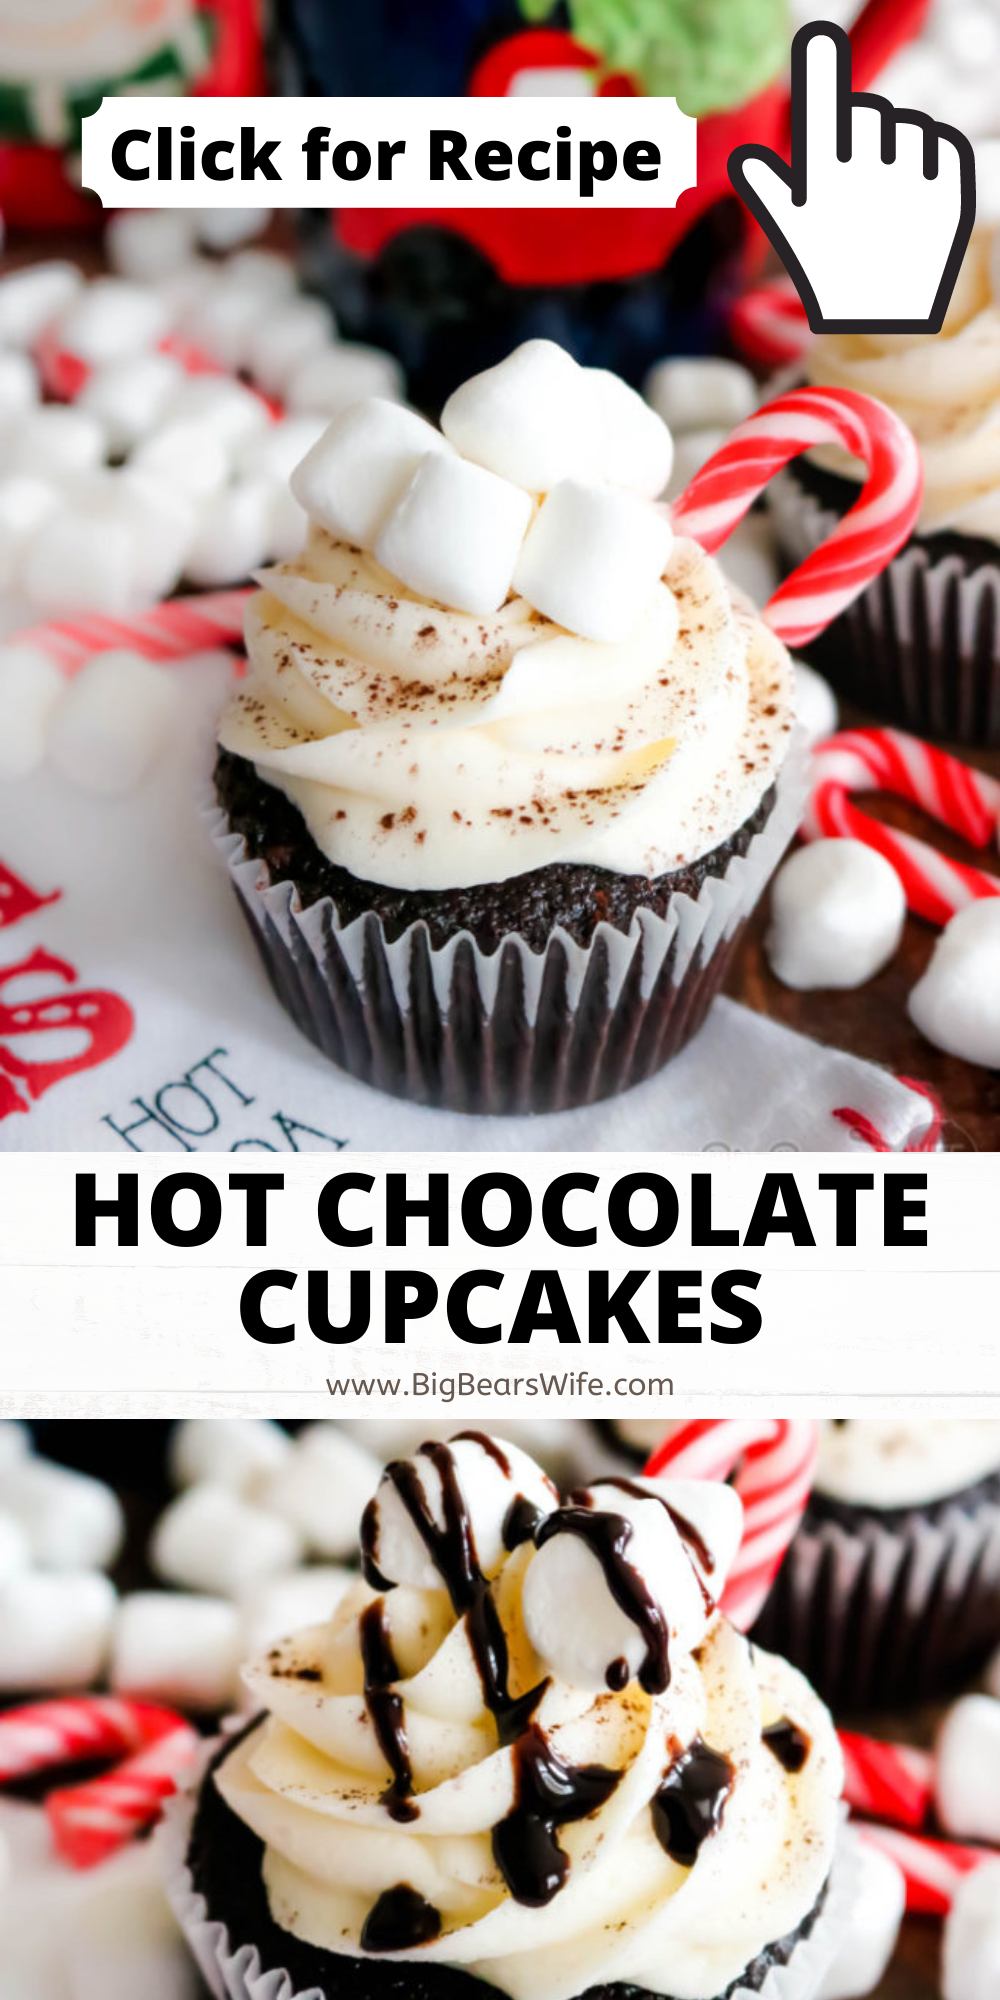 Hot Chocolate Cupcakes - Whip up your favorite hot chocolate mix into these Hot Chocolate Cupcakes for the perfect winter evening treat! Top them with homemade marshmallow frosting and decorate them with mini marshmallows, mini candy canes and chocolate syrup to look like tiny mugs of hot cocoa!  via @bigbearswife